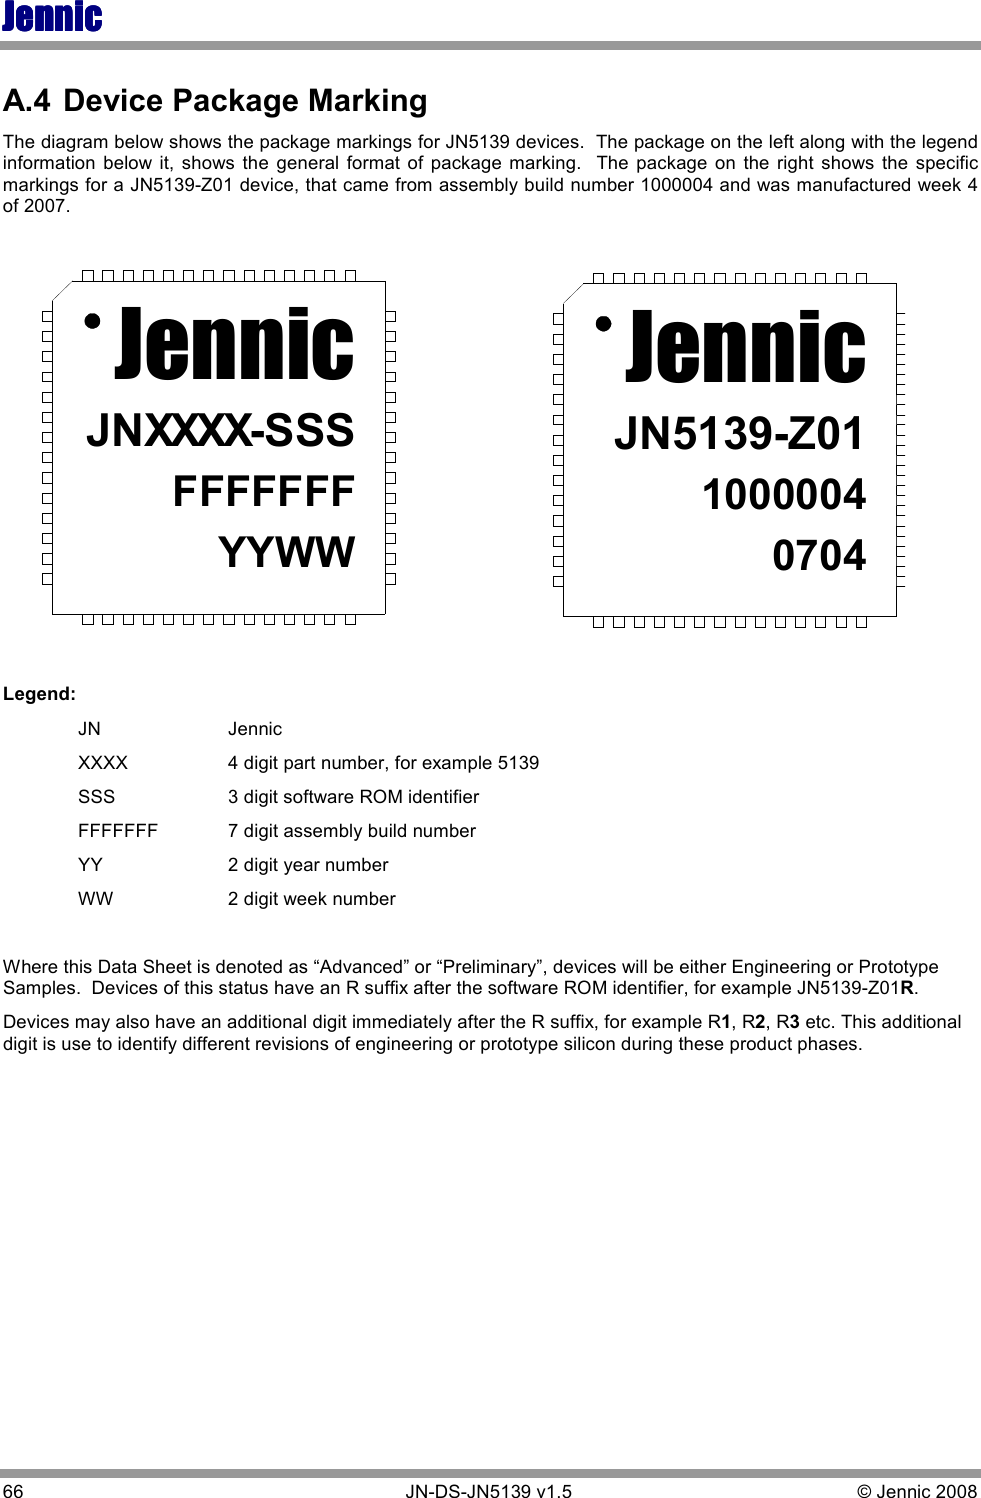 JennicJennicJennicJennic 66        JN-DS-JN5139 v1.5  © Jennic 2008  A.4  Device Package Marking The diagram below shows the package markings for JN5139 devices.  The package on the left along with the legend information  below  it,  shows  the  general  format  of  package marking.    The  package  on  the  right shows  the  specific markings for a JN5139-Z01 device, that came from assembly build number 1000004 and was manufactured week 4 of 2007.  JennicJNXXXX-SSSFFFFFFFYYWWJennicJN5139-Z0110000040704 Legend:   JN    Jennic   XXXX    4 digit part number, for example 5139   SSS    3 digit software ROM identifier   FFFFFFF  7 digit assembly build number   YY    2 digit year number   WW    2 digit week number  Where this Data Sheet is denoted as “Advanced” or “Preliminary”, devices will be either Engineering or Prototype Samples.  Devices of this status have an R suffix after the software ROM identifier, for example JN5139-Z01R. Devices may also have an additional digit immediately after the R suffix, for example R1, R2, R3 etc. This additional digit is use to identify different revisions of engineering or prototype silicon during these product phases. 